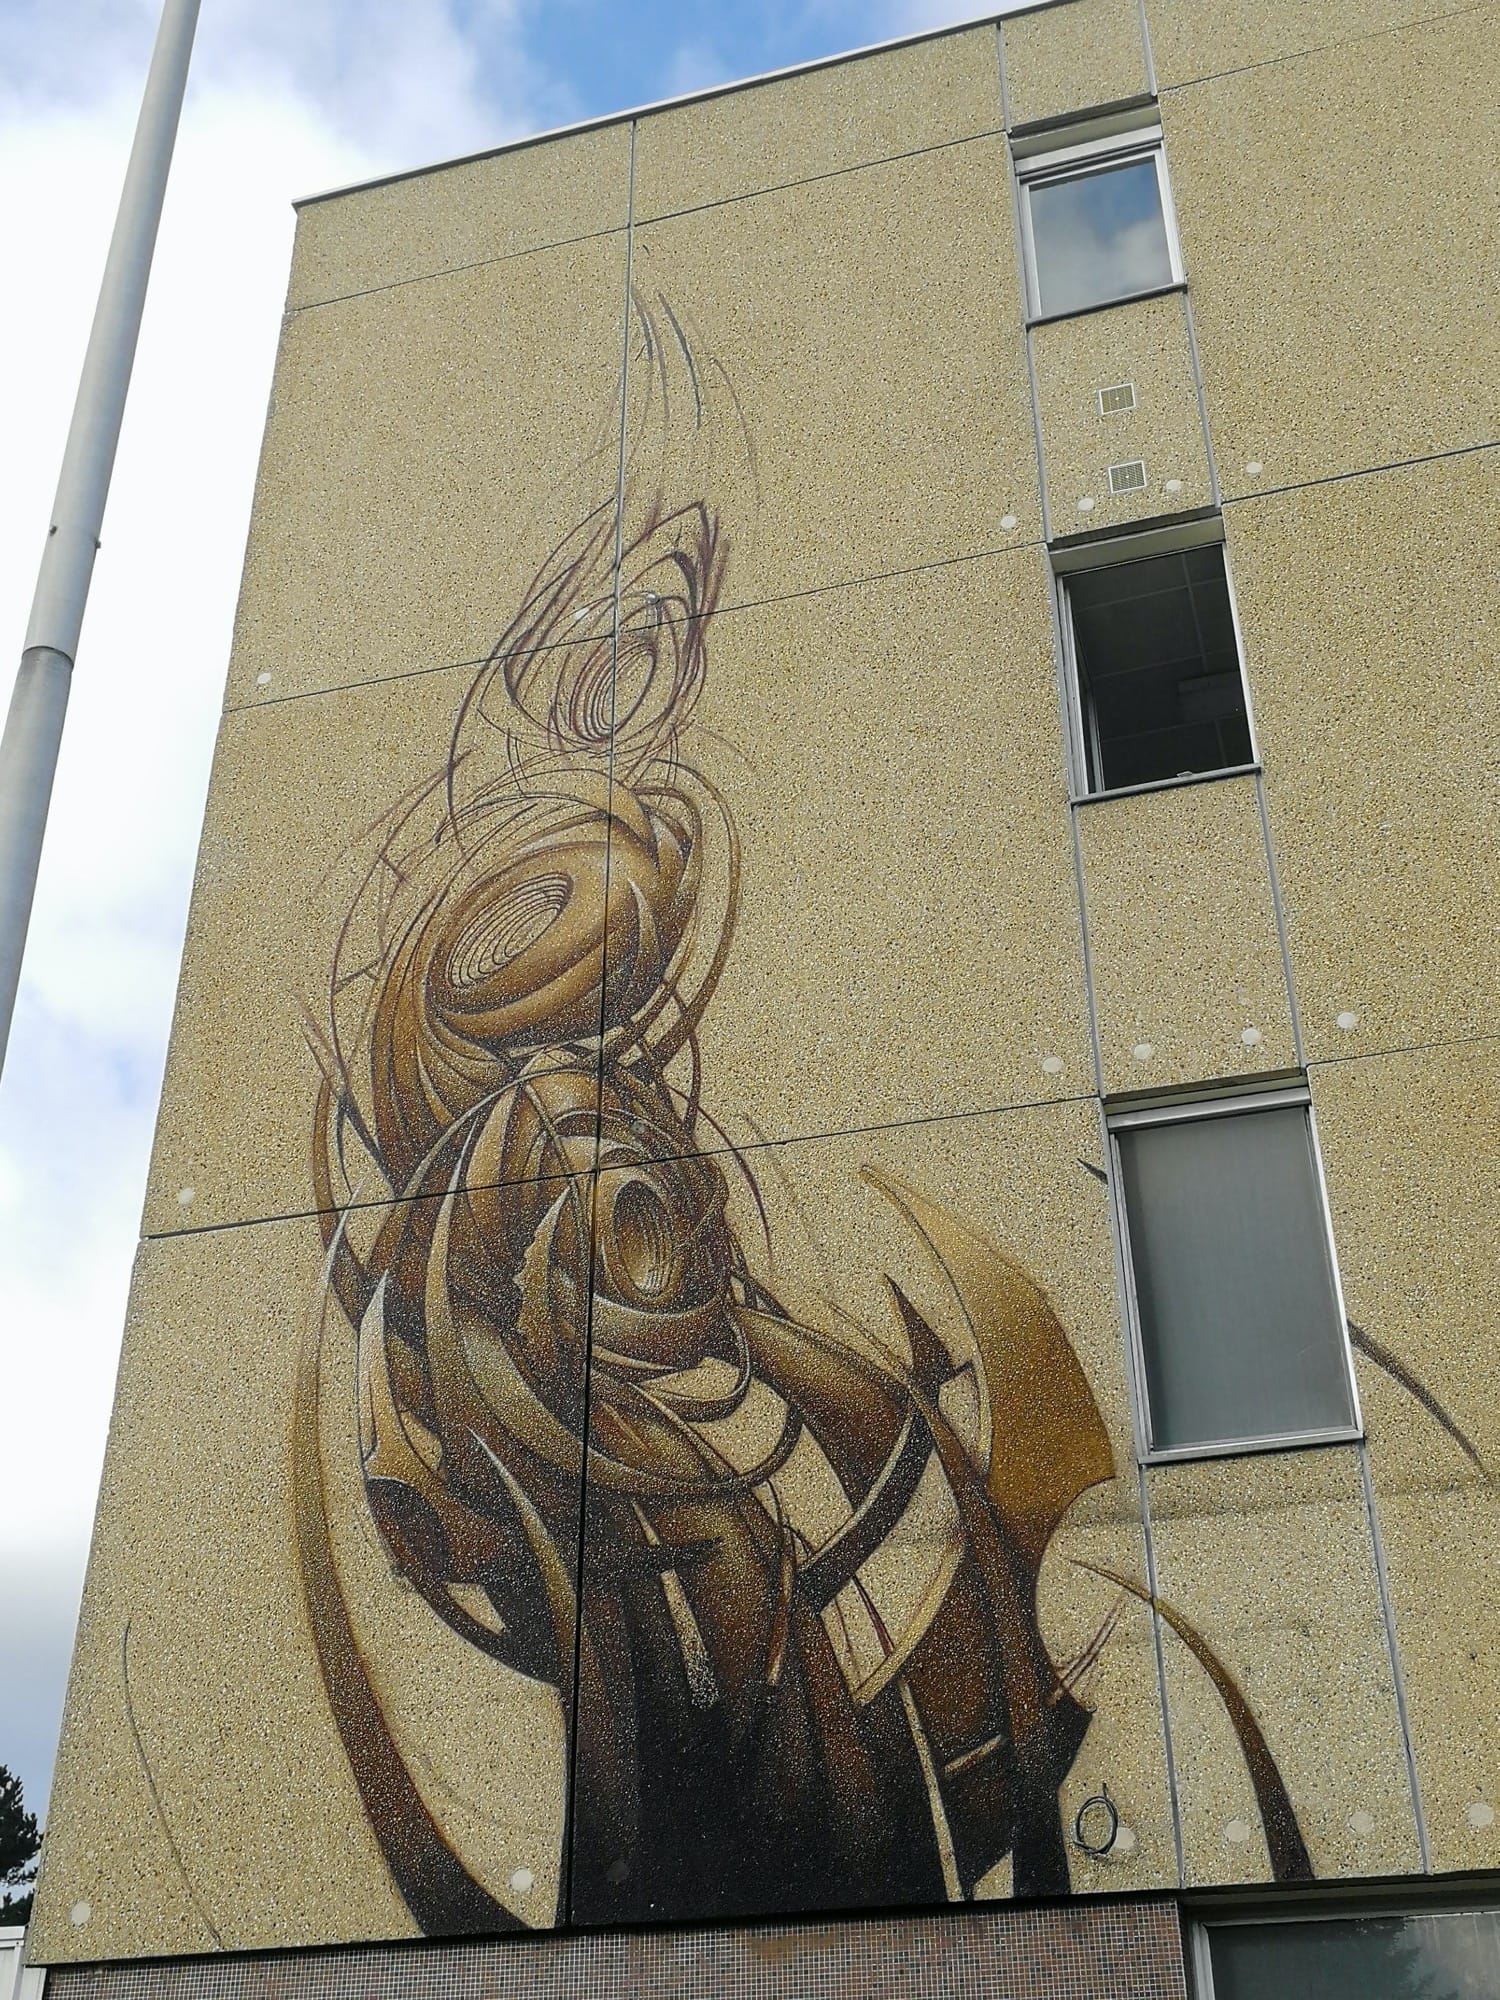 Graffiti 4476  by the artist Rea One captured by Rabot in Ploufragan France